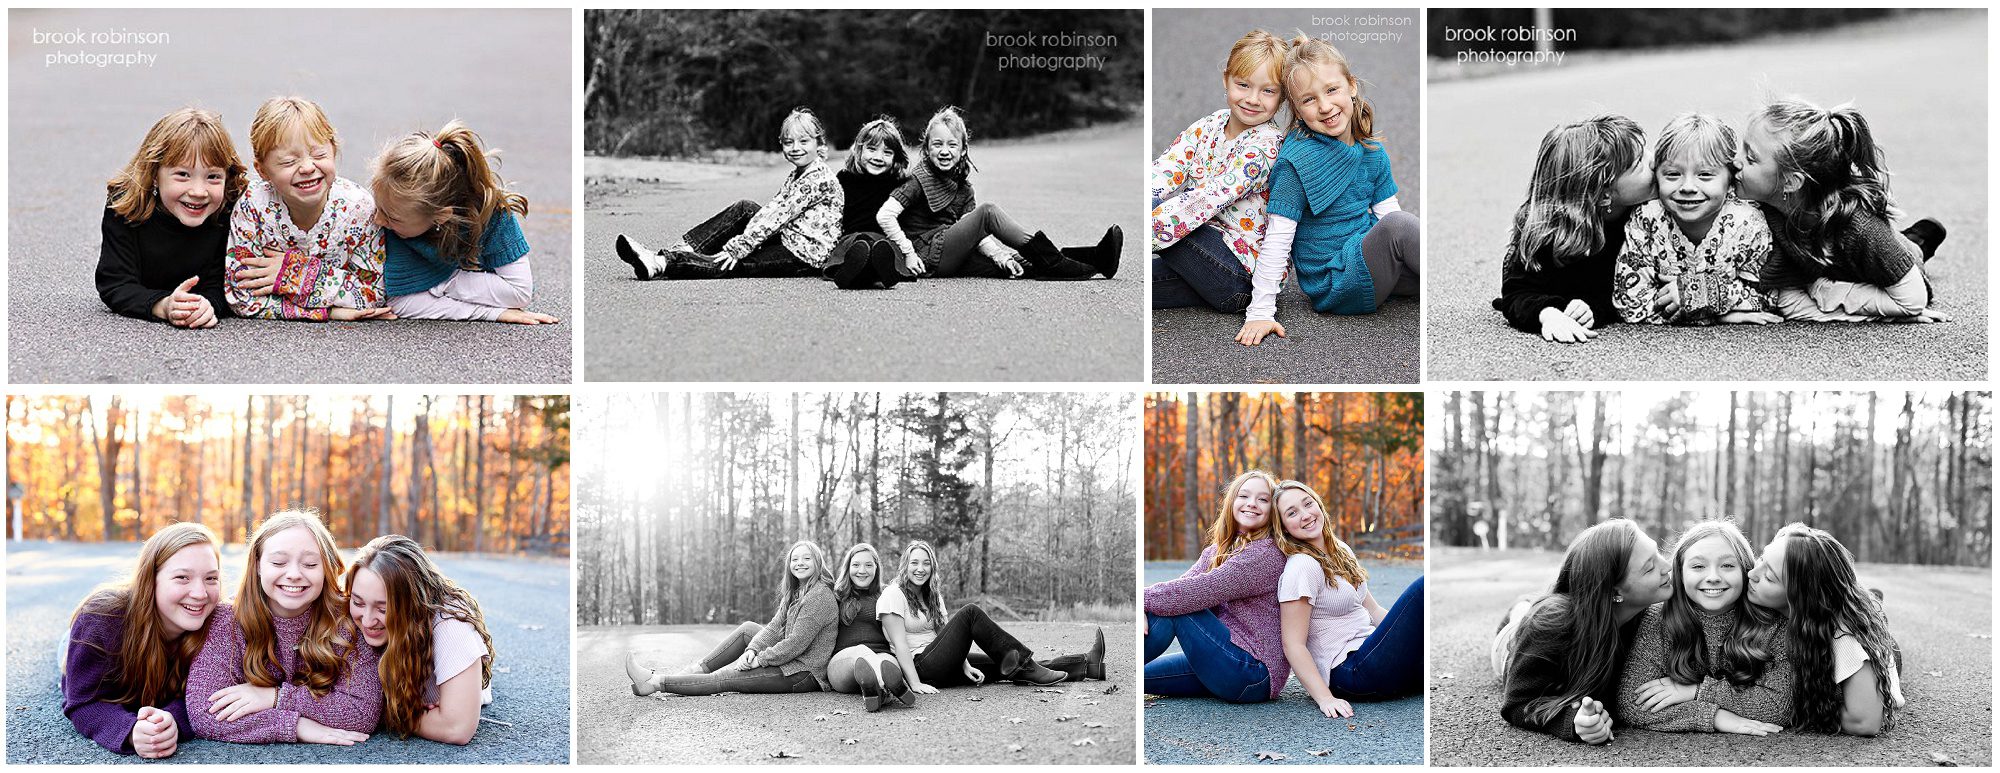 Family Portraits Recreated 10 Years Later Fluvanna Photographer Charlottesville Pictures Fall autumn Photoshoot recreation decade growing up siblings